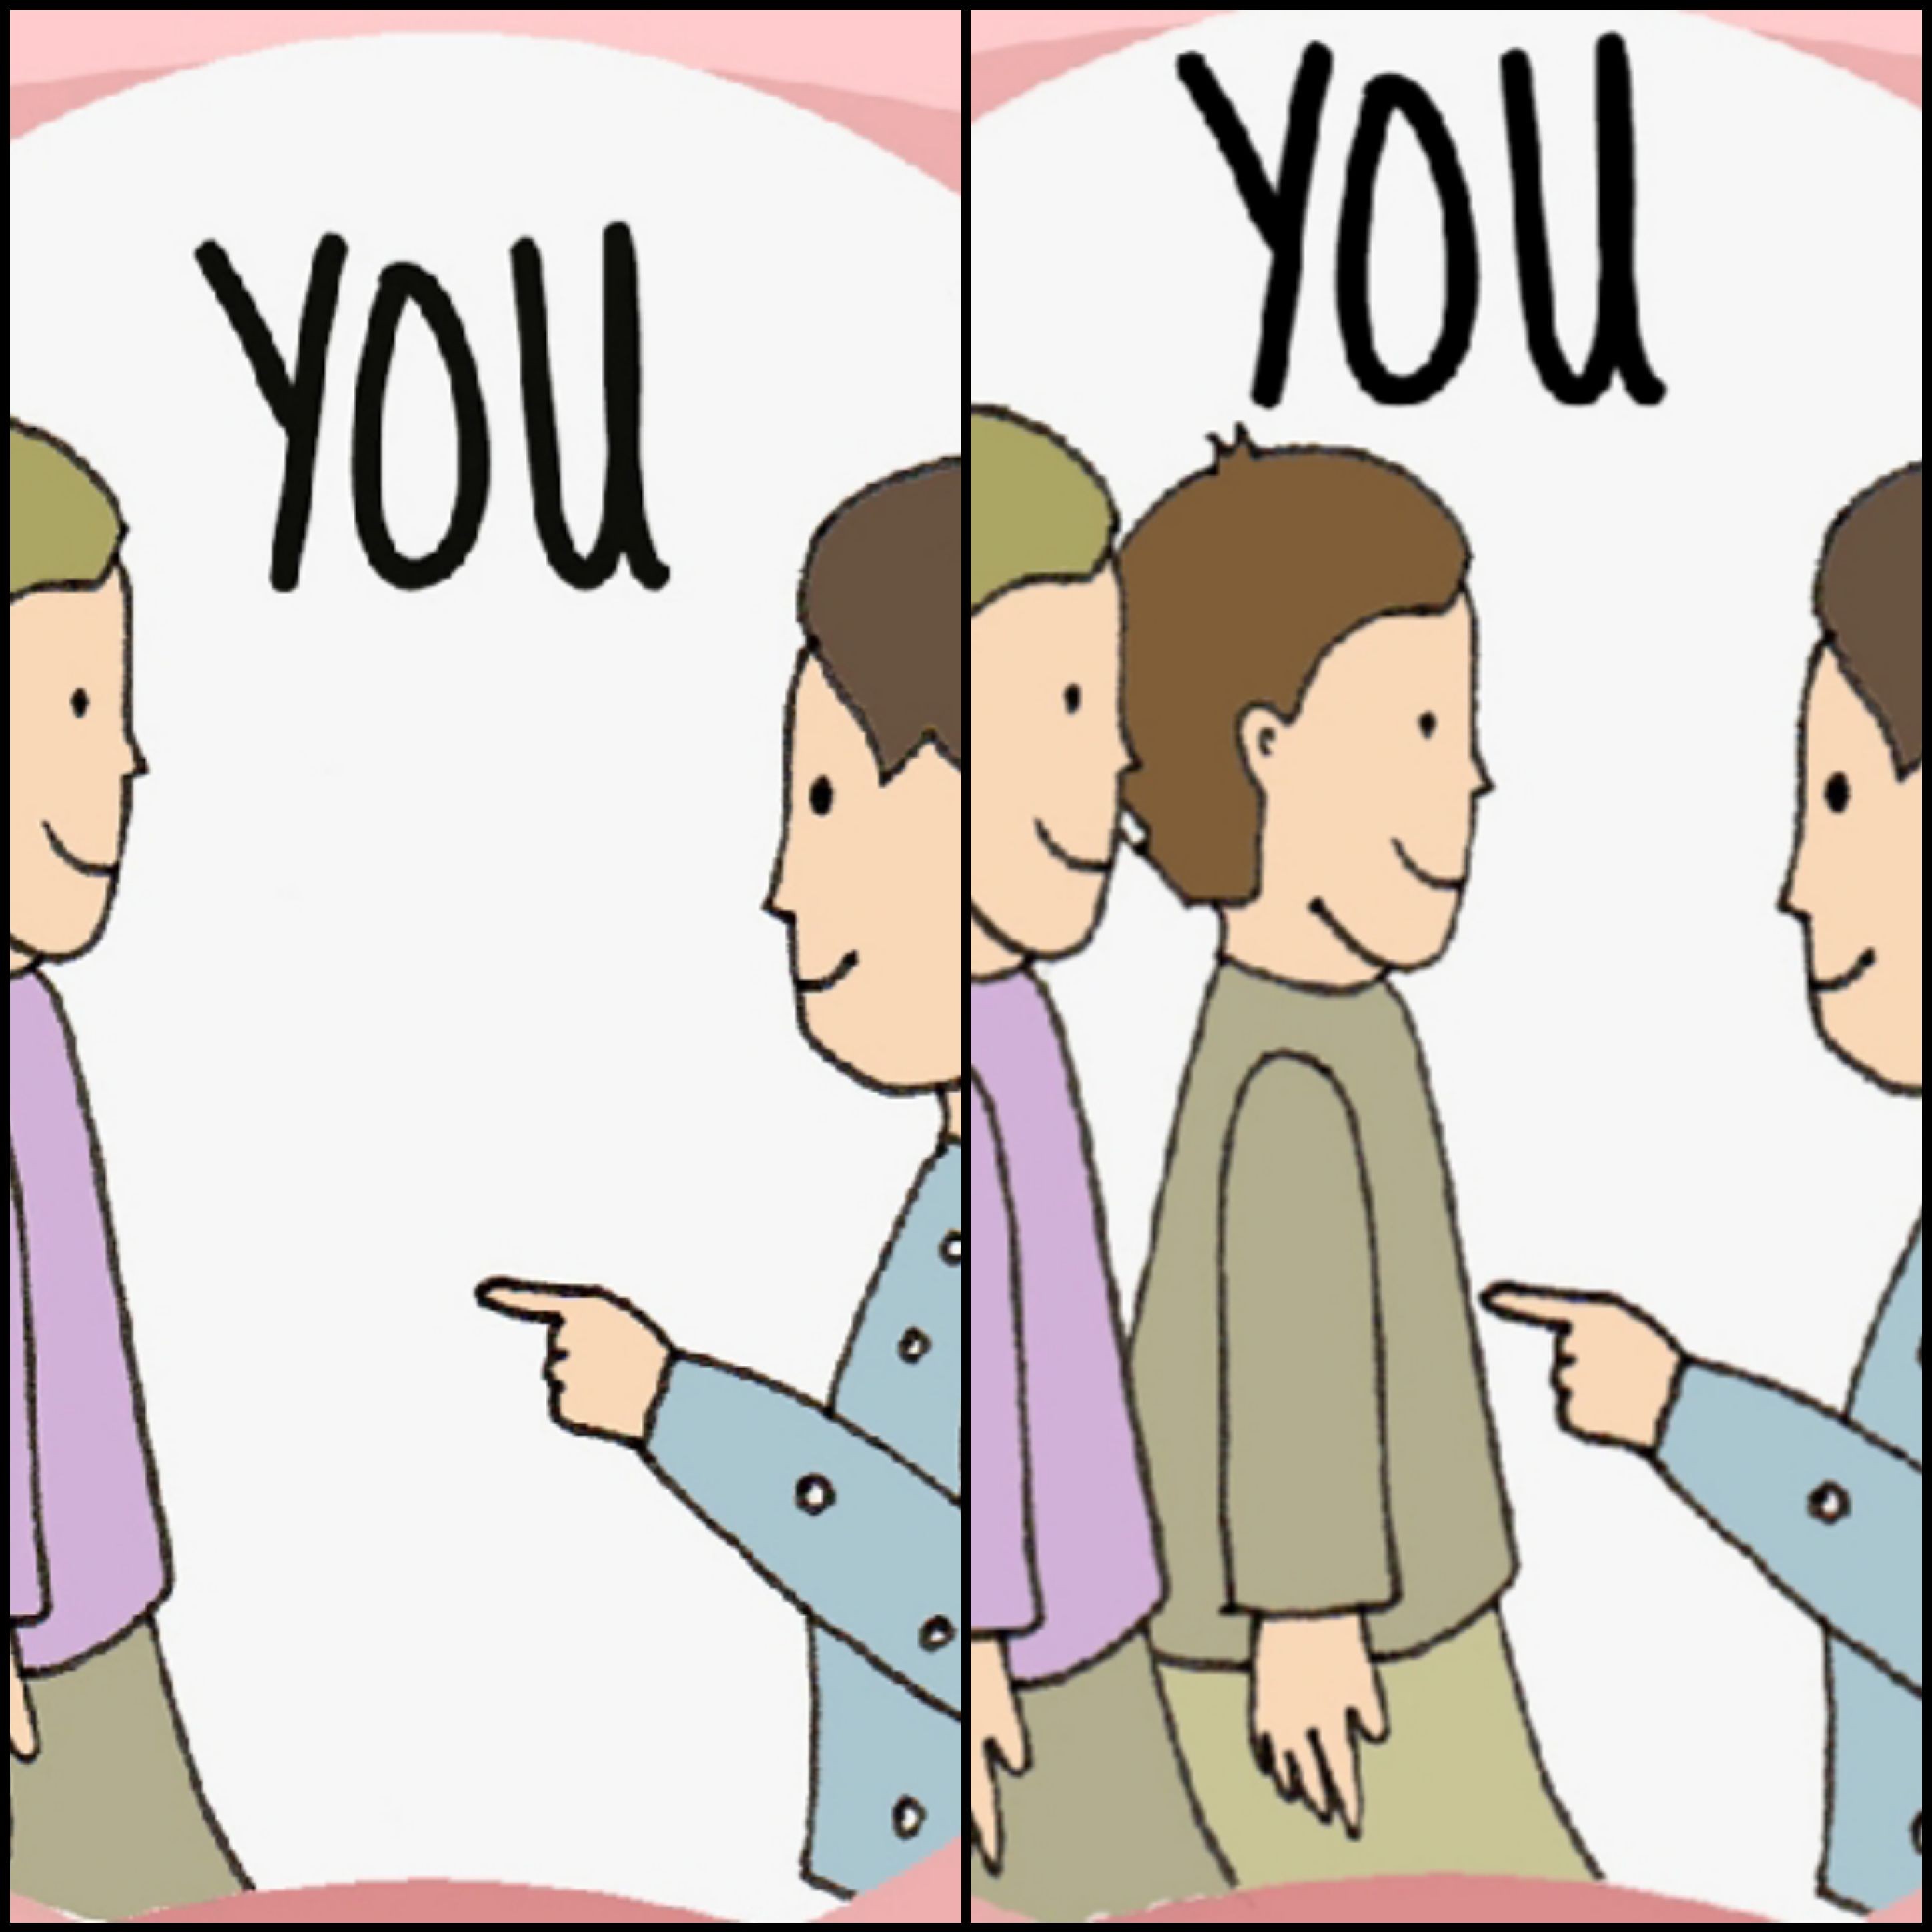 You (used for singular or plural)